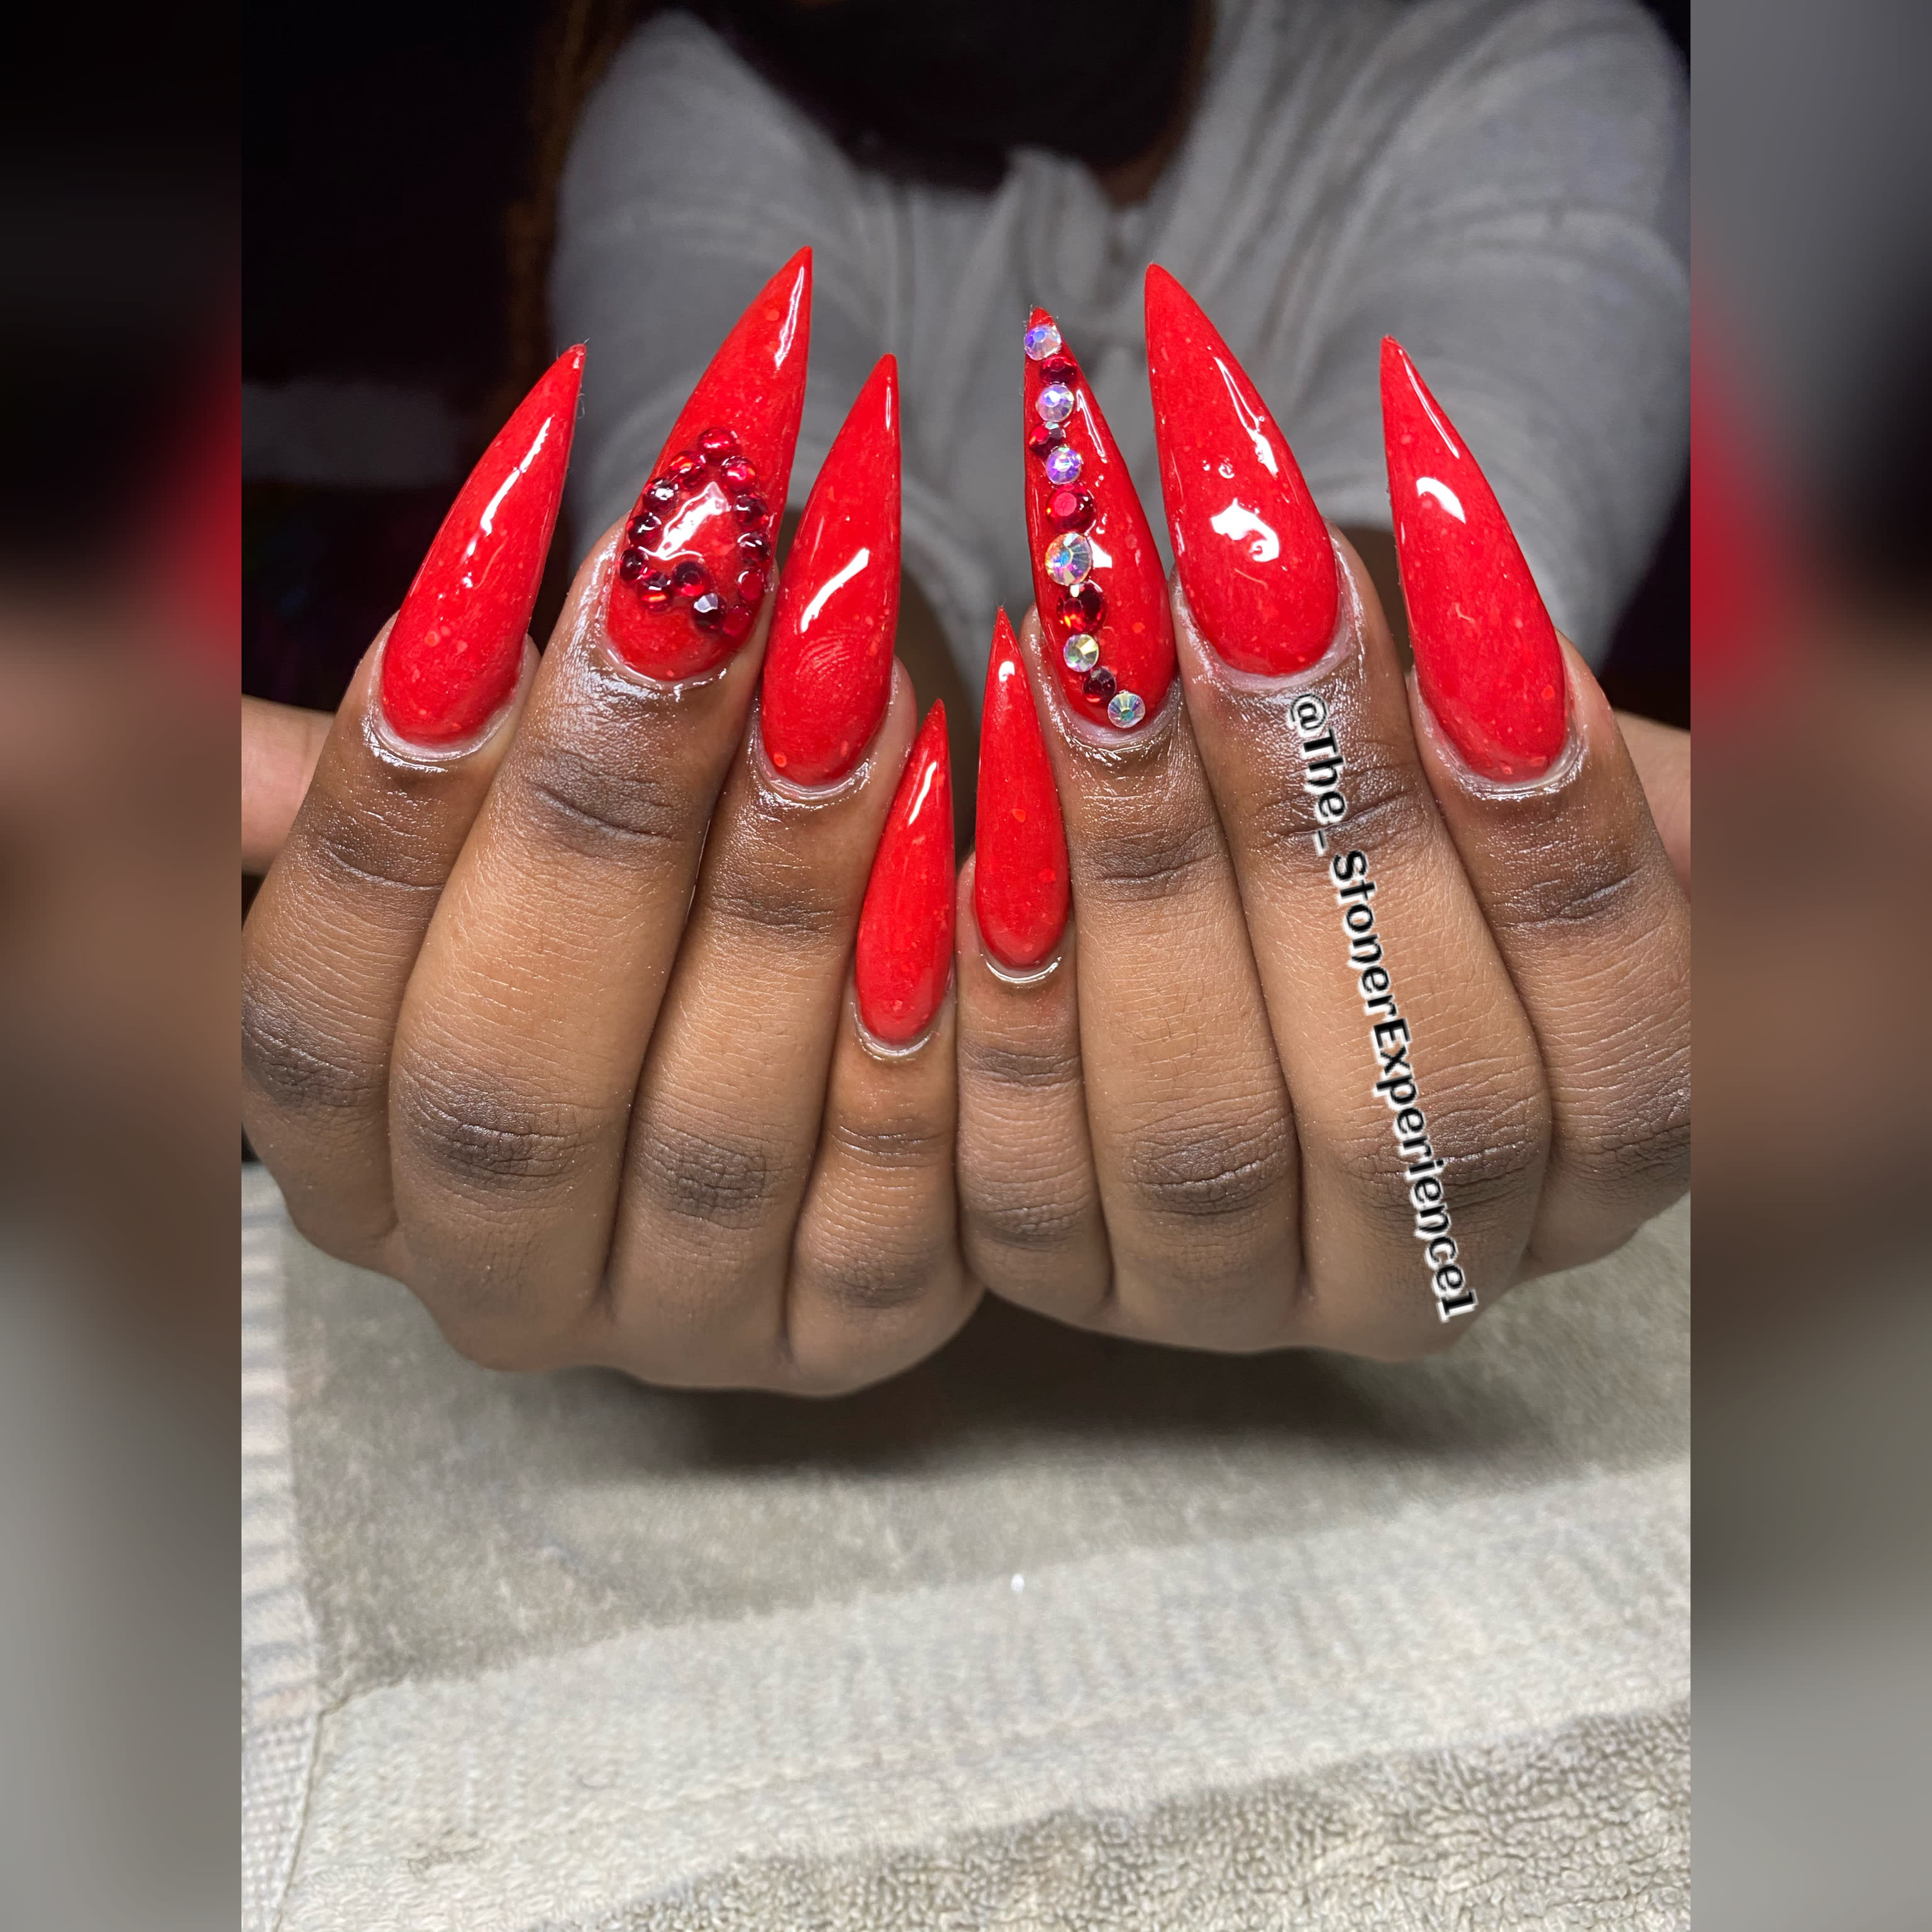 Red Bling Nails 